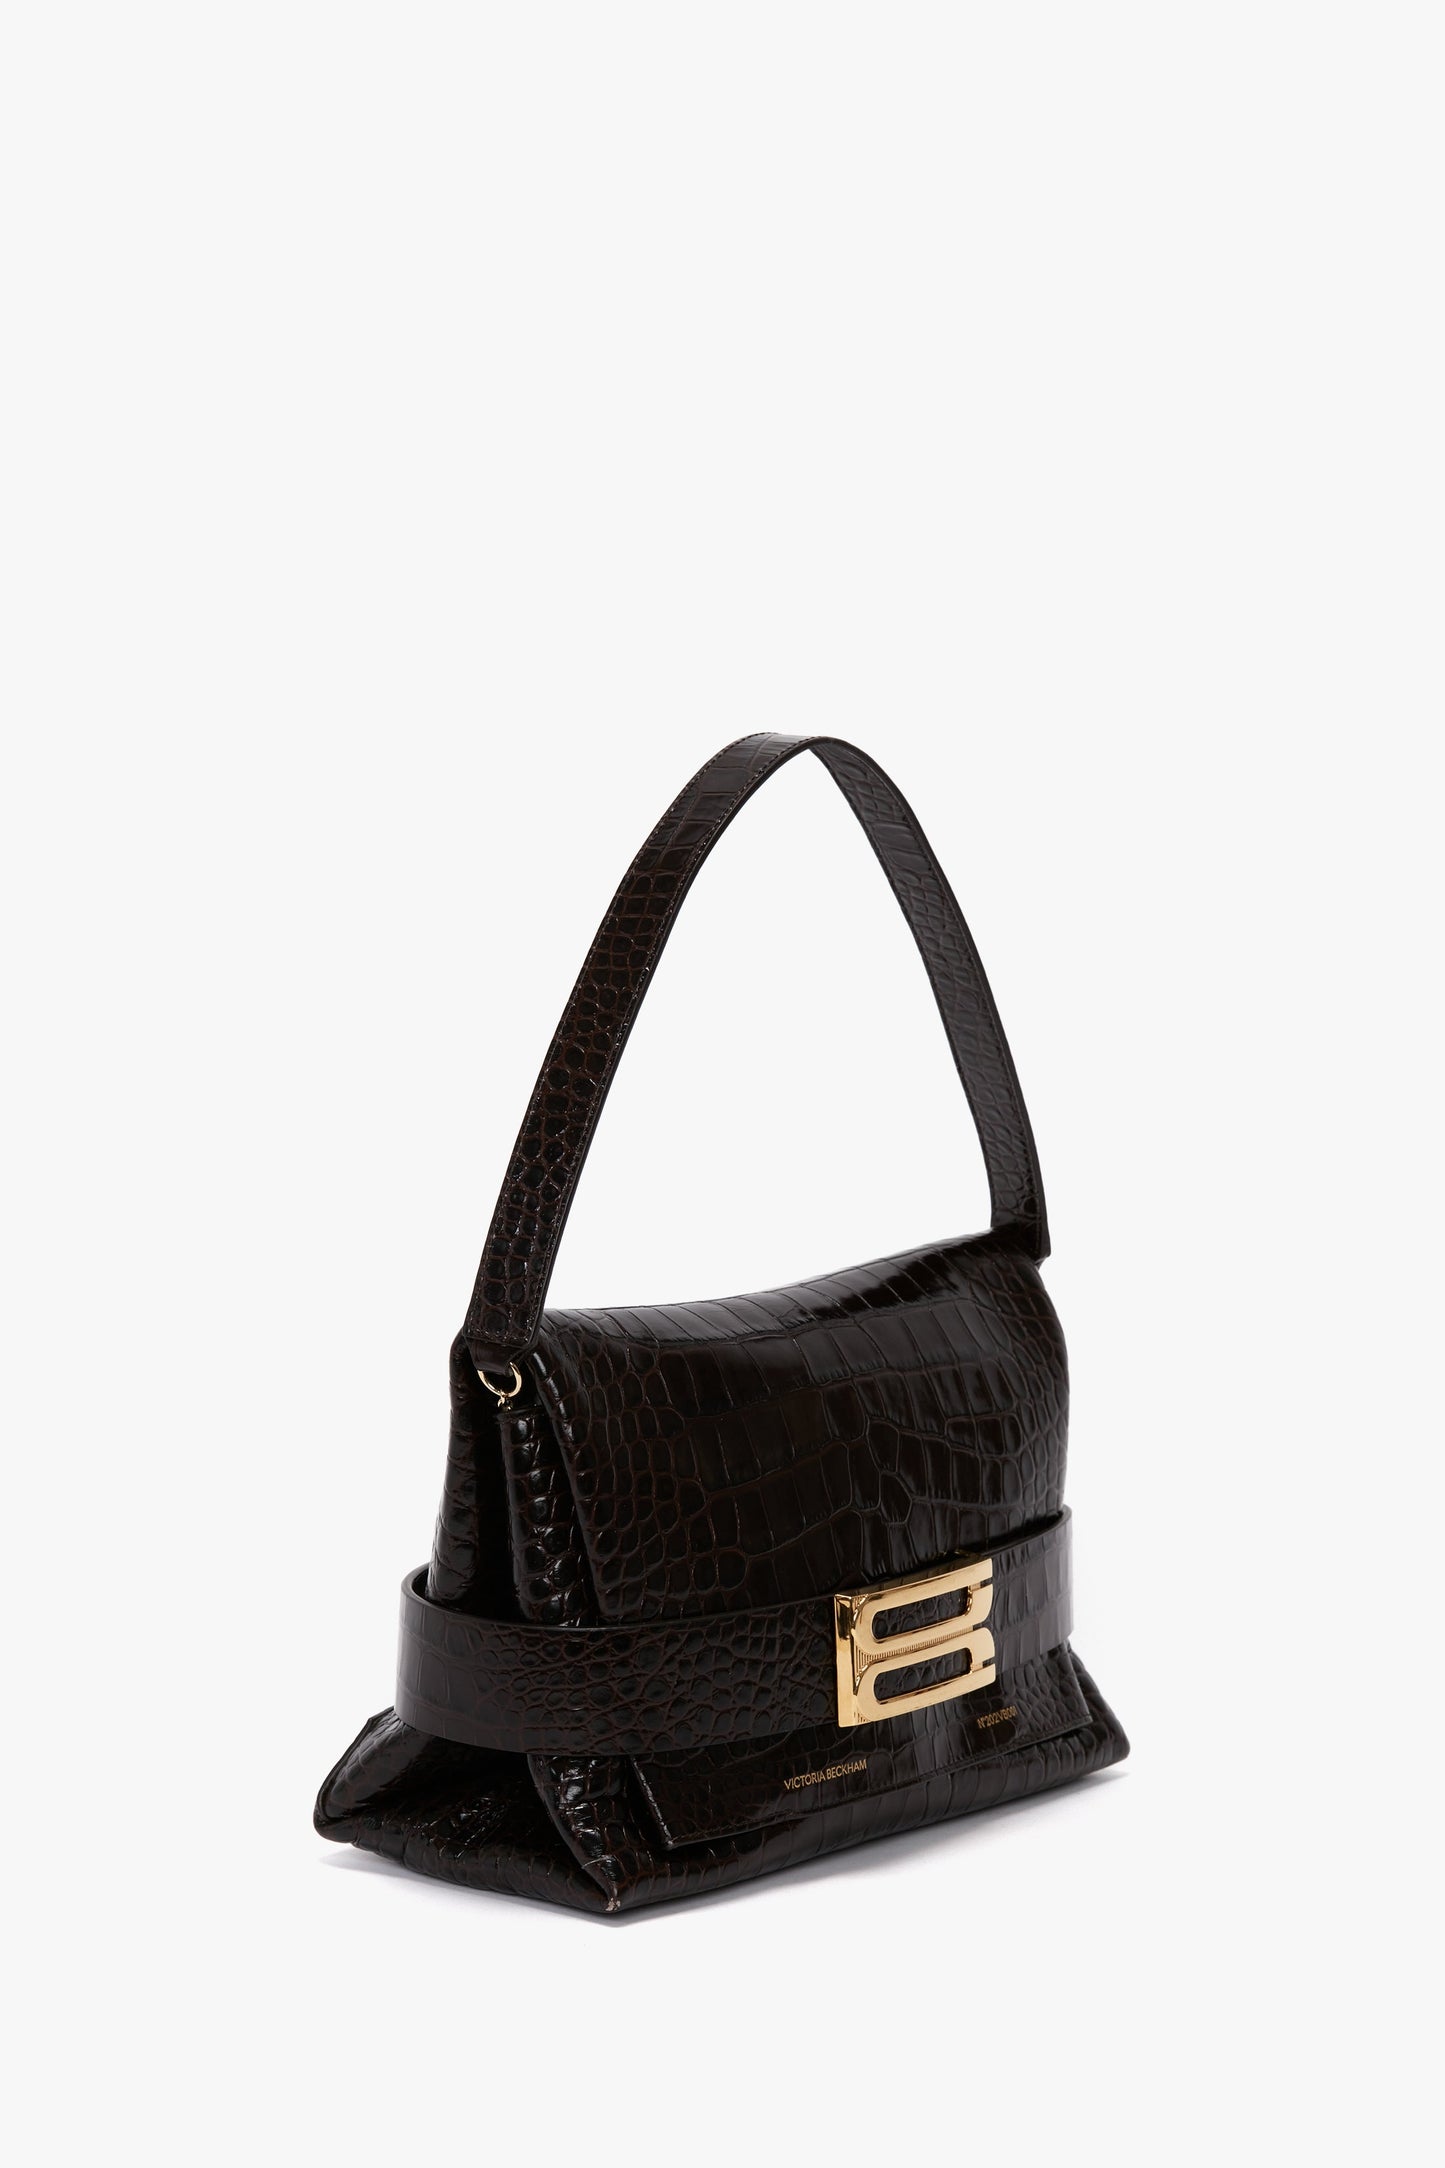 A small, black handbag crafted from calf leather with an embossed crocodile print, featuring a short strap and a gold buckle closure is the **B Pouch Bag In Croc Effect Espresso Leather by Victoria Beckham**.